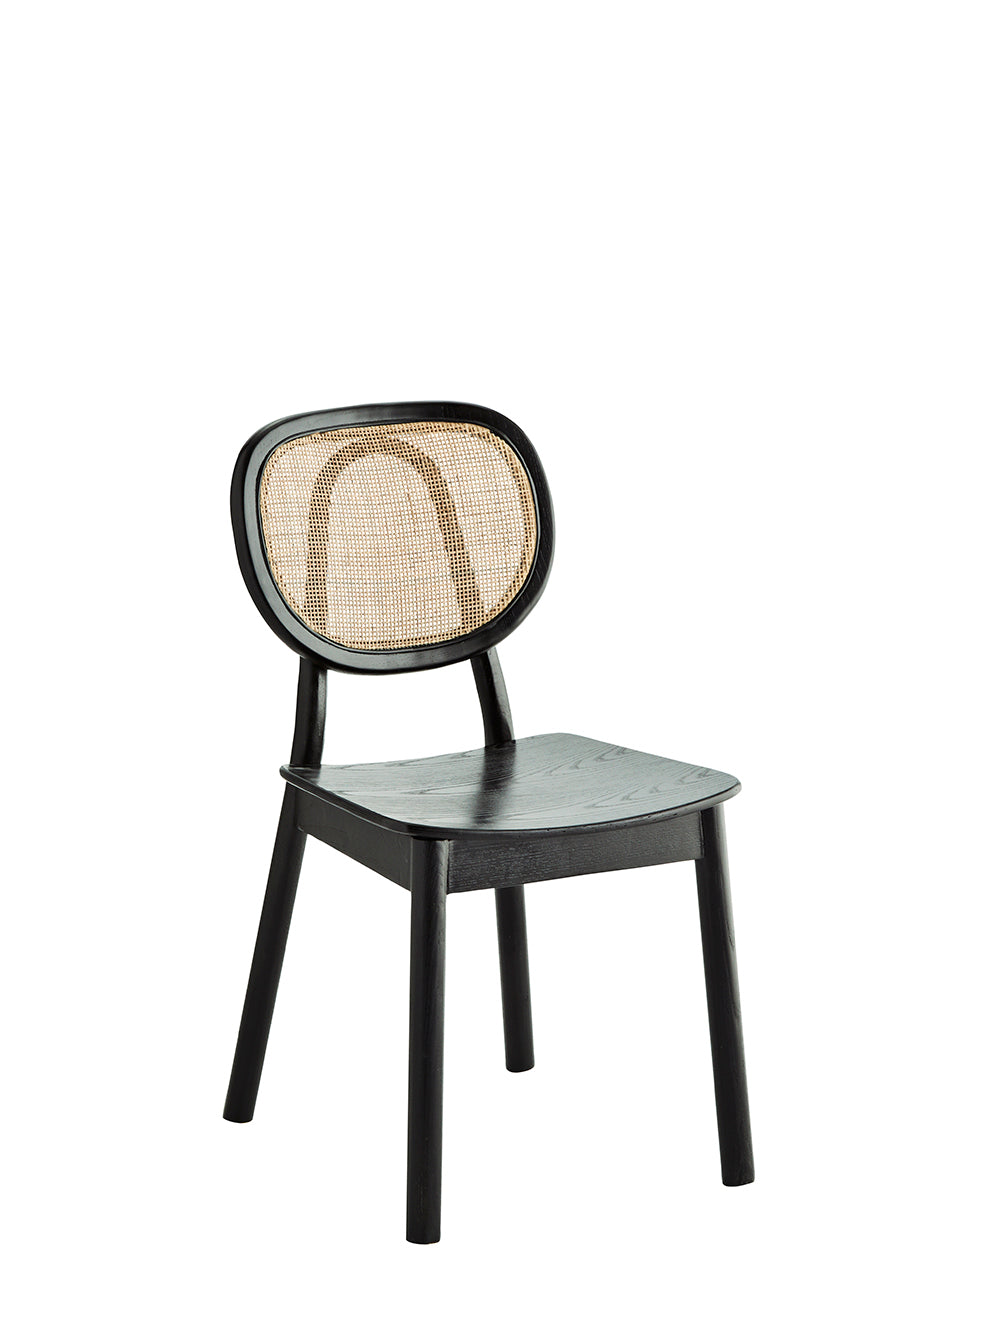 WOODEN CHAIR WITH RATTAN